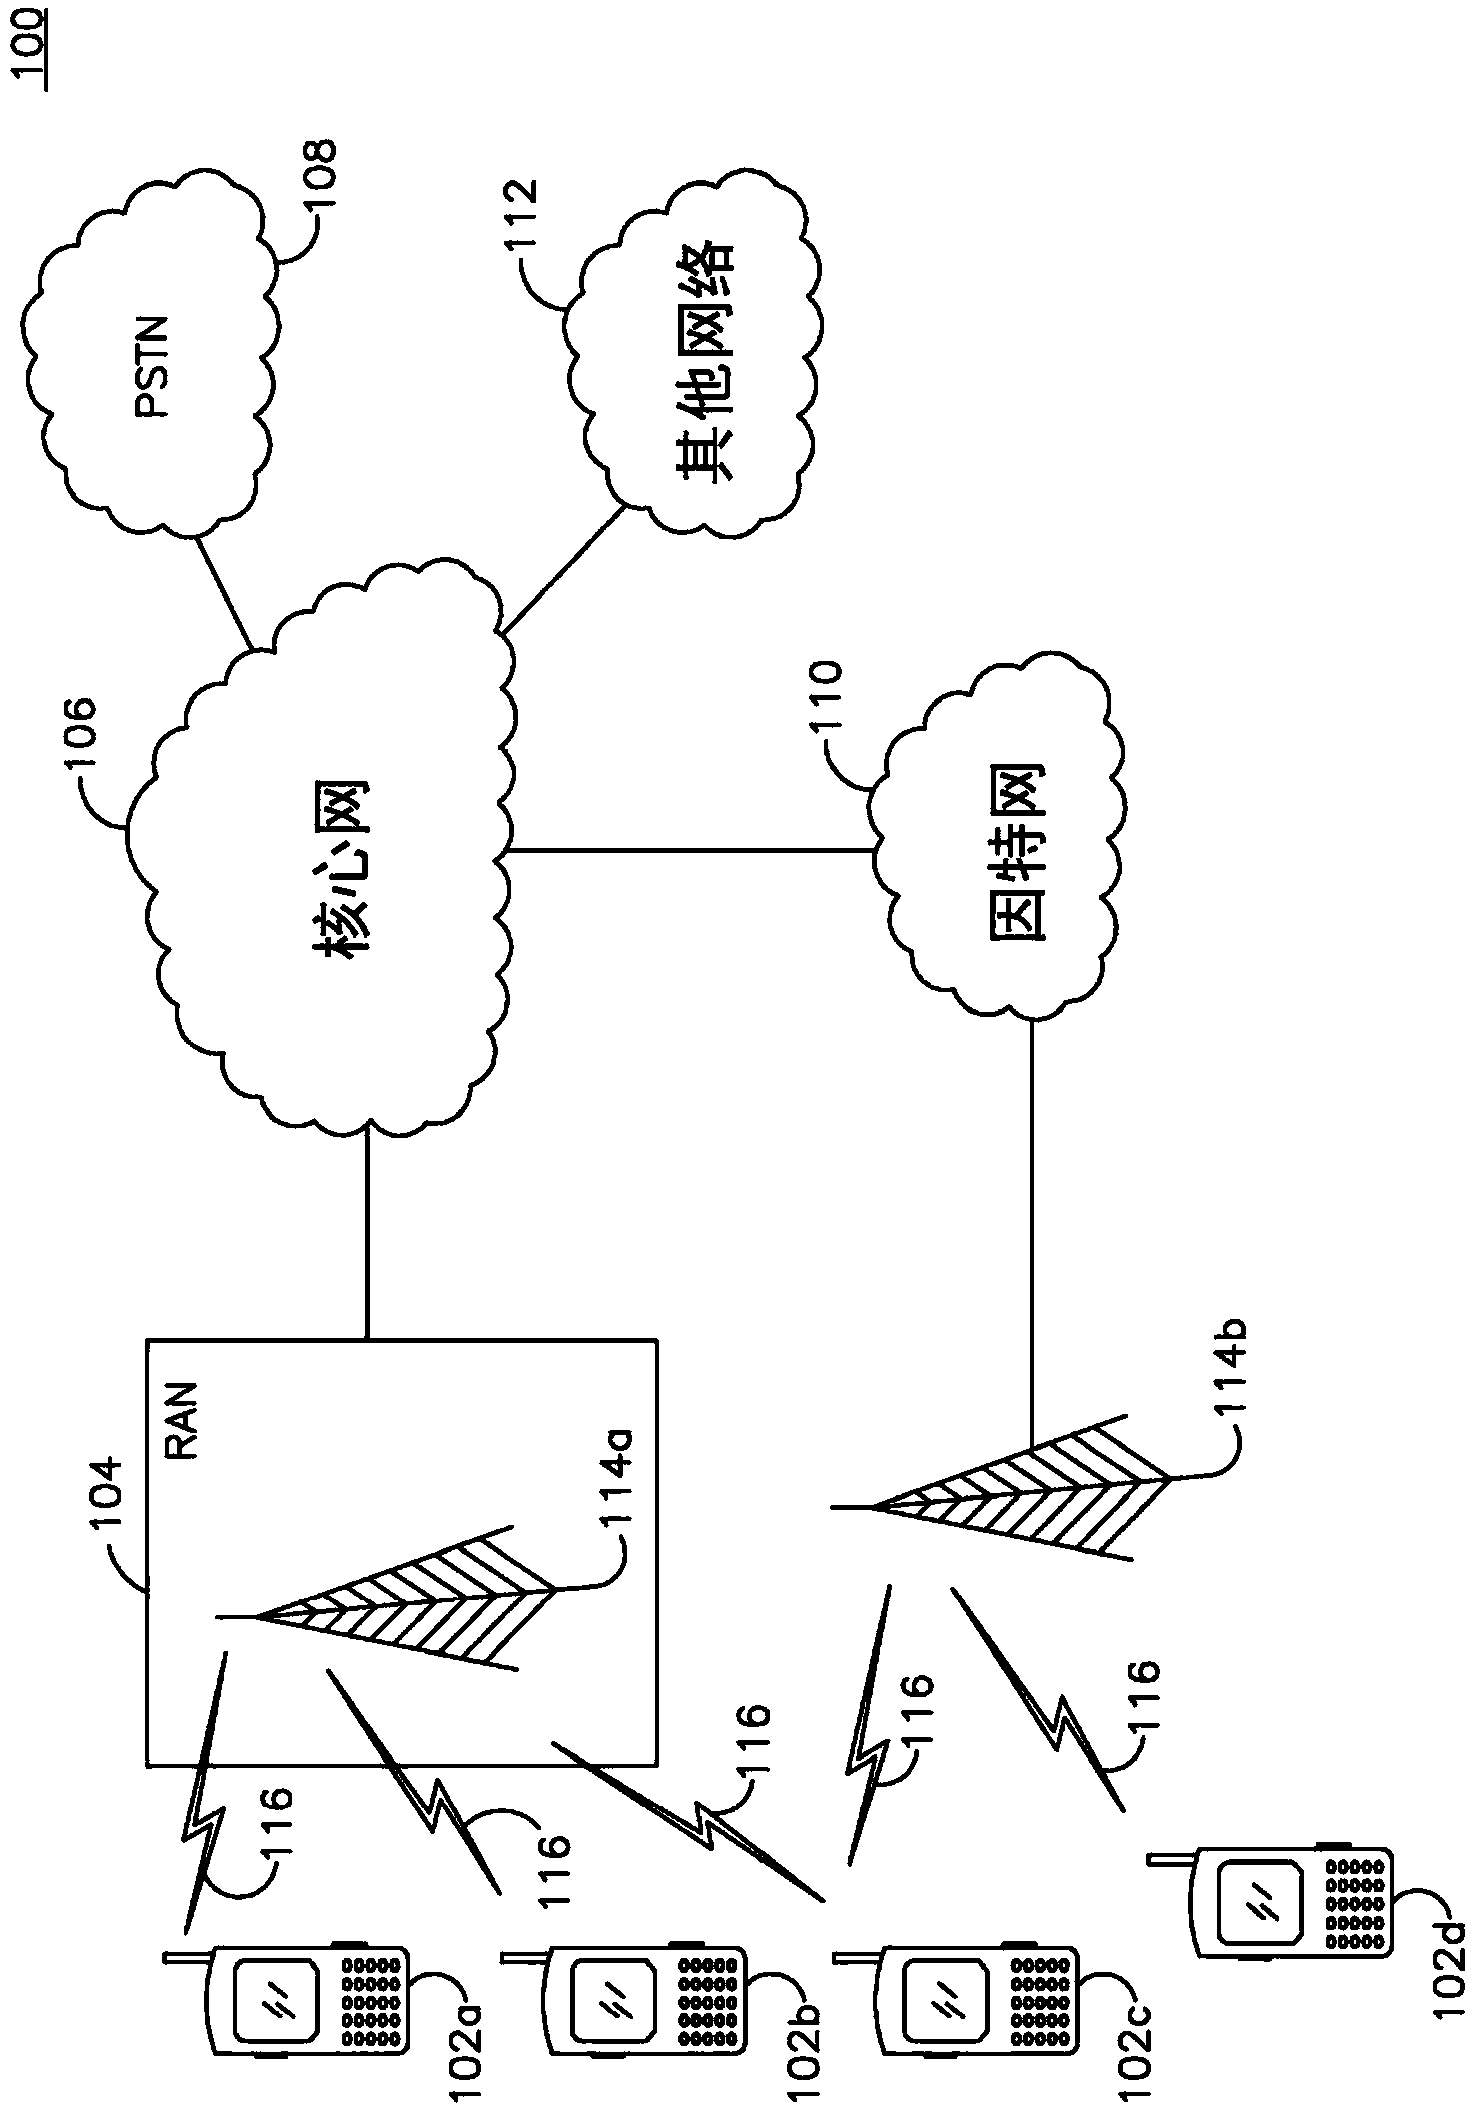 Method and apparatus for millimeter wave communication system